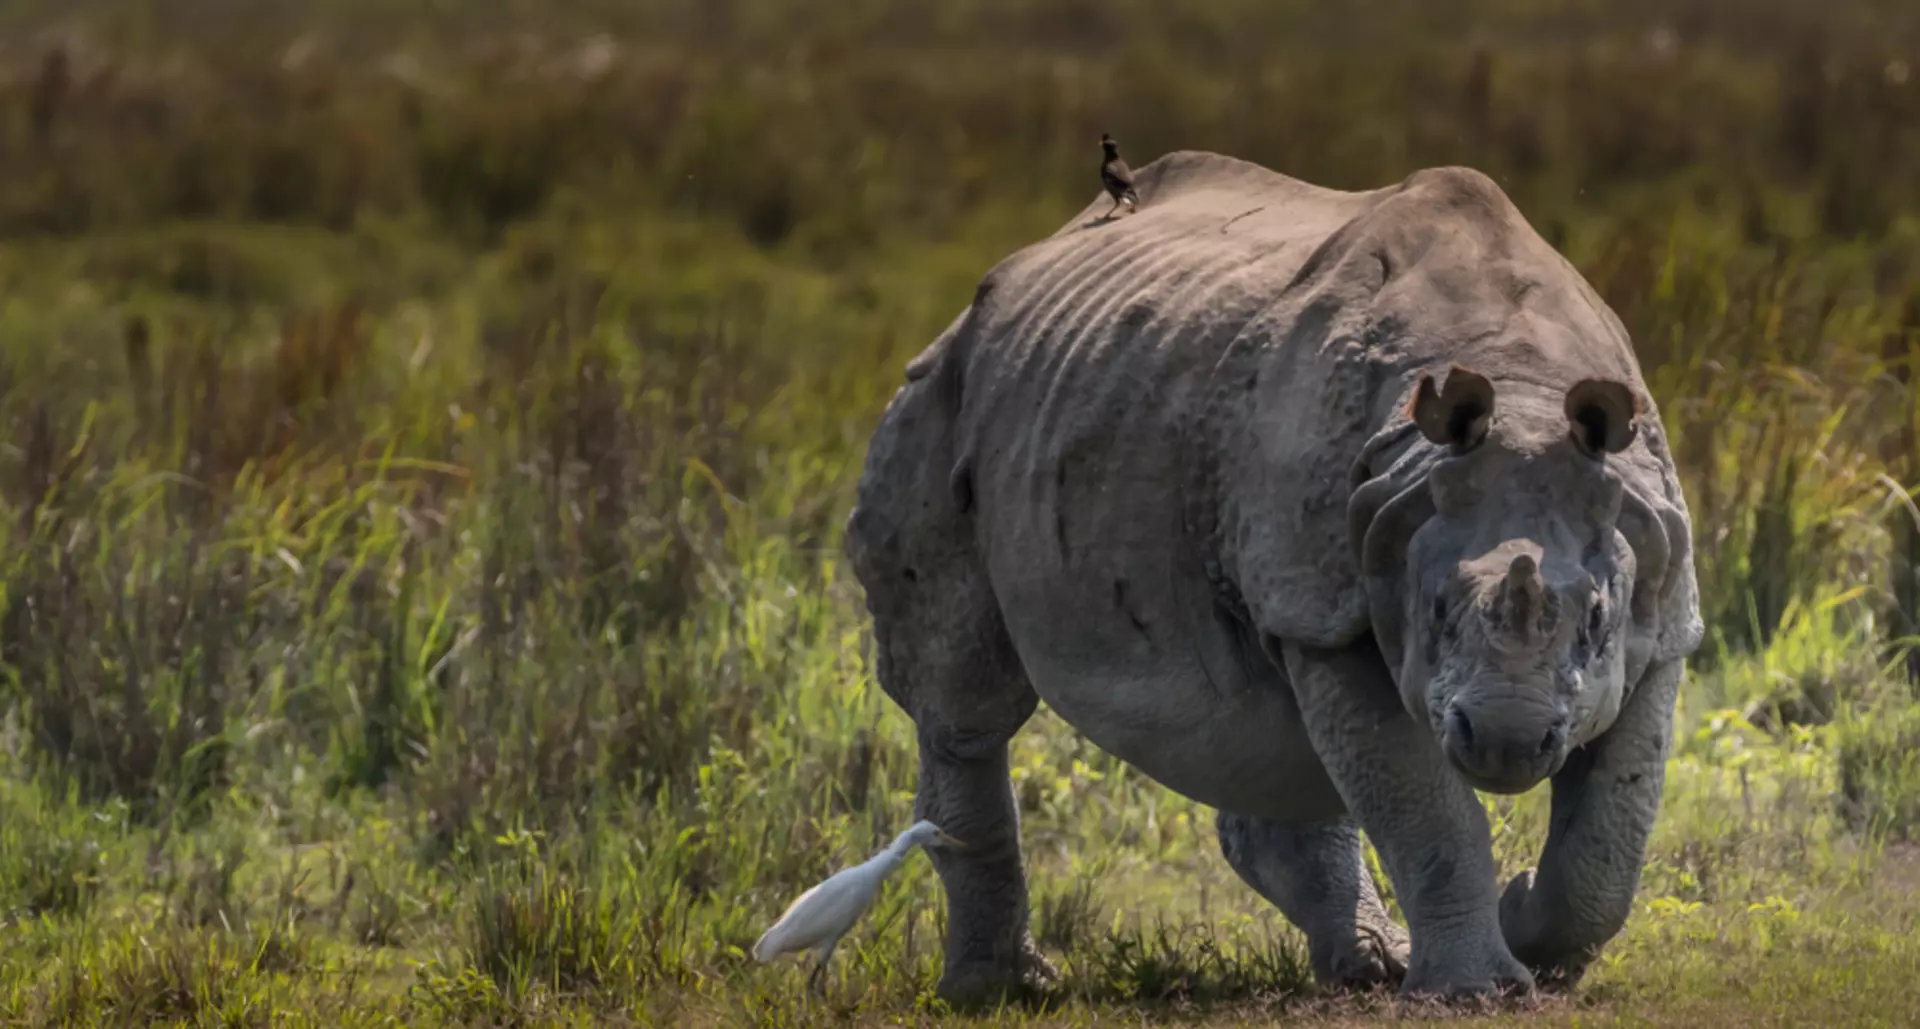 Greater one-horned rhino conservation | ZSL